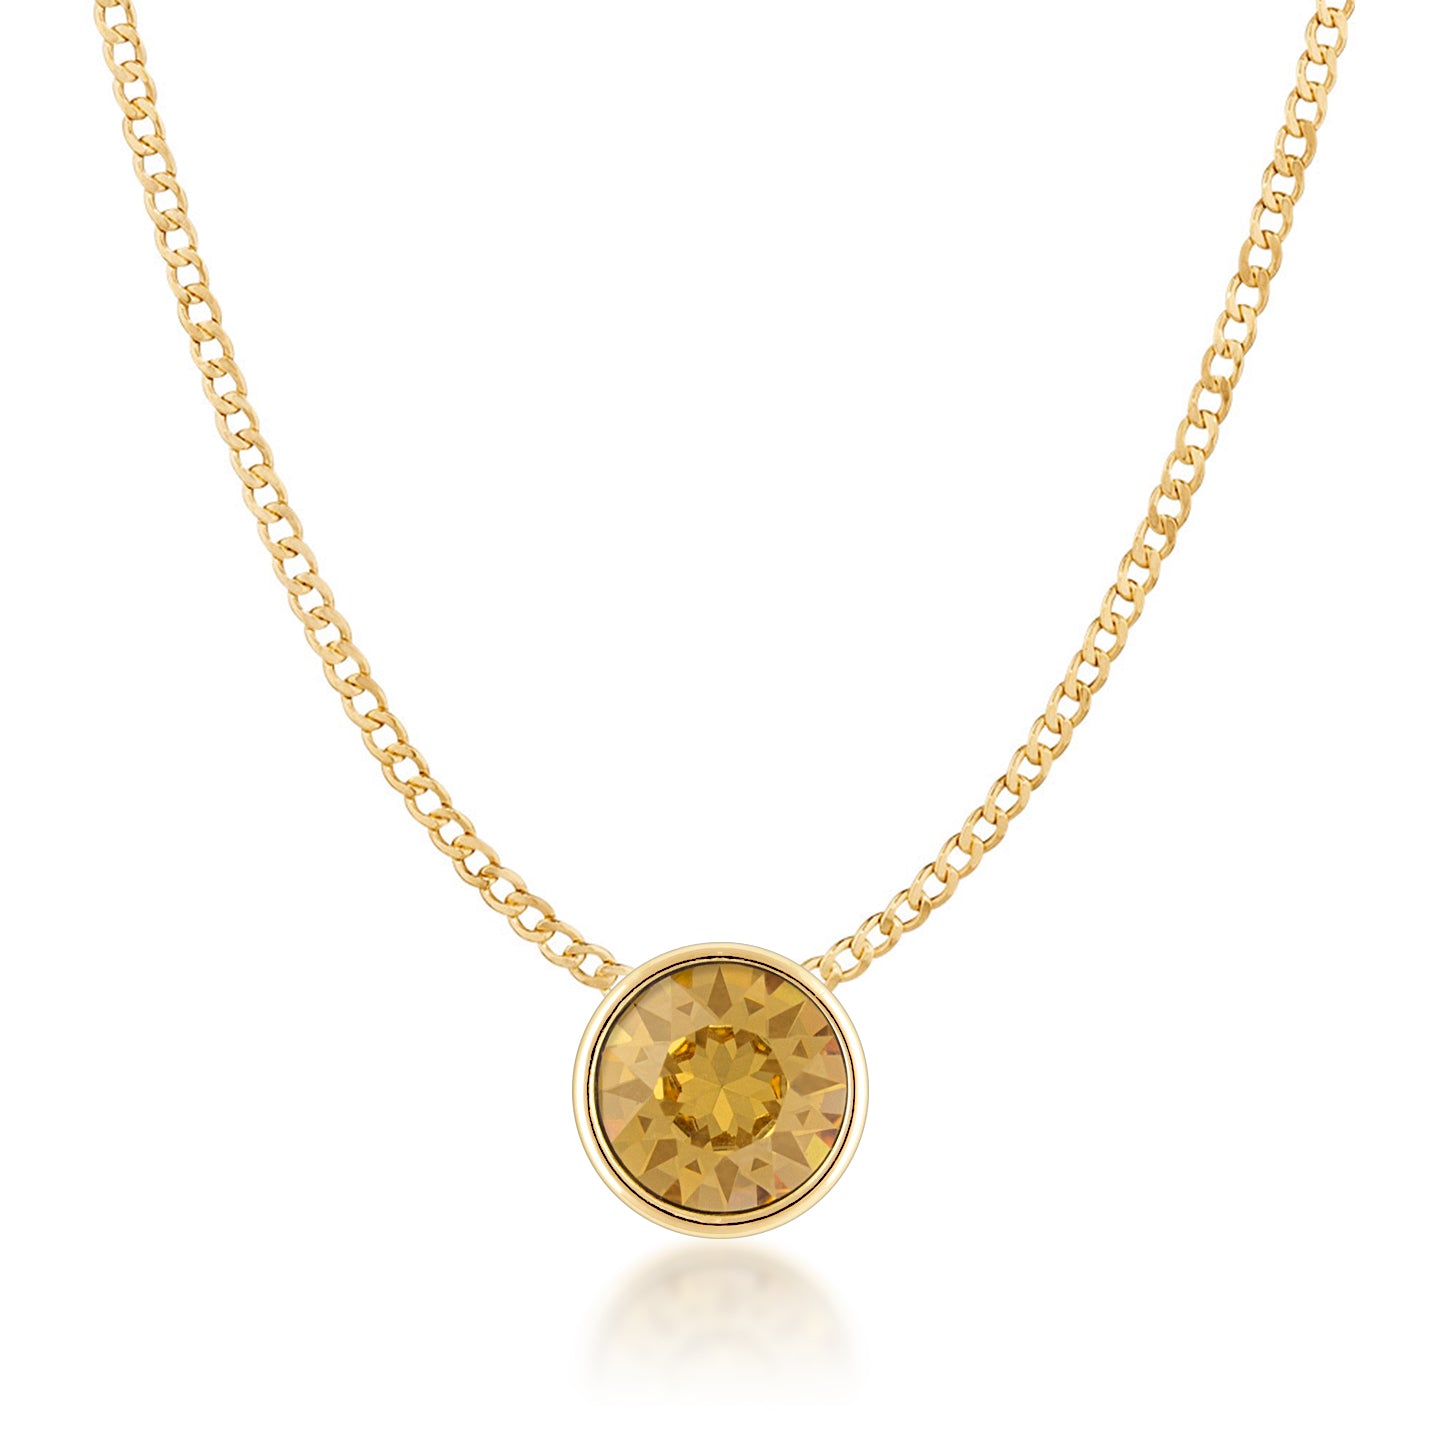 Harley Small Pendant Necklace with Yellow Brown Light Topaz Round Crystals from Swarovski Gold Plated - Ed Heart